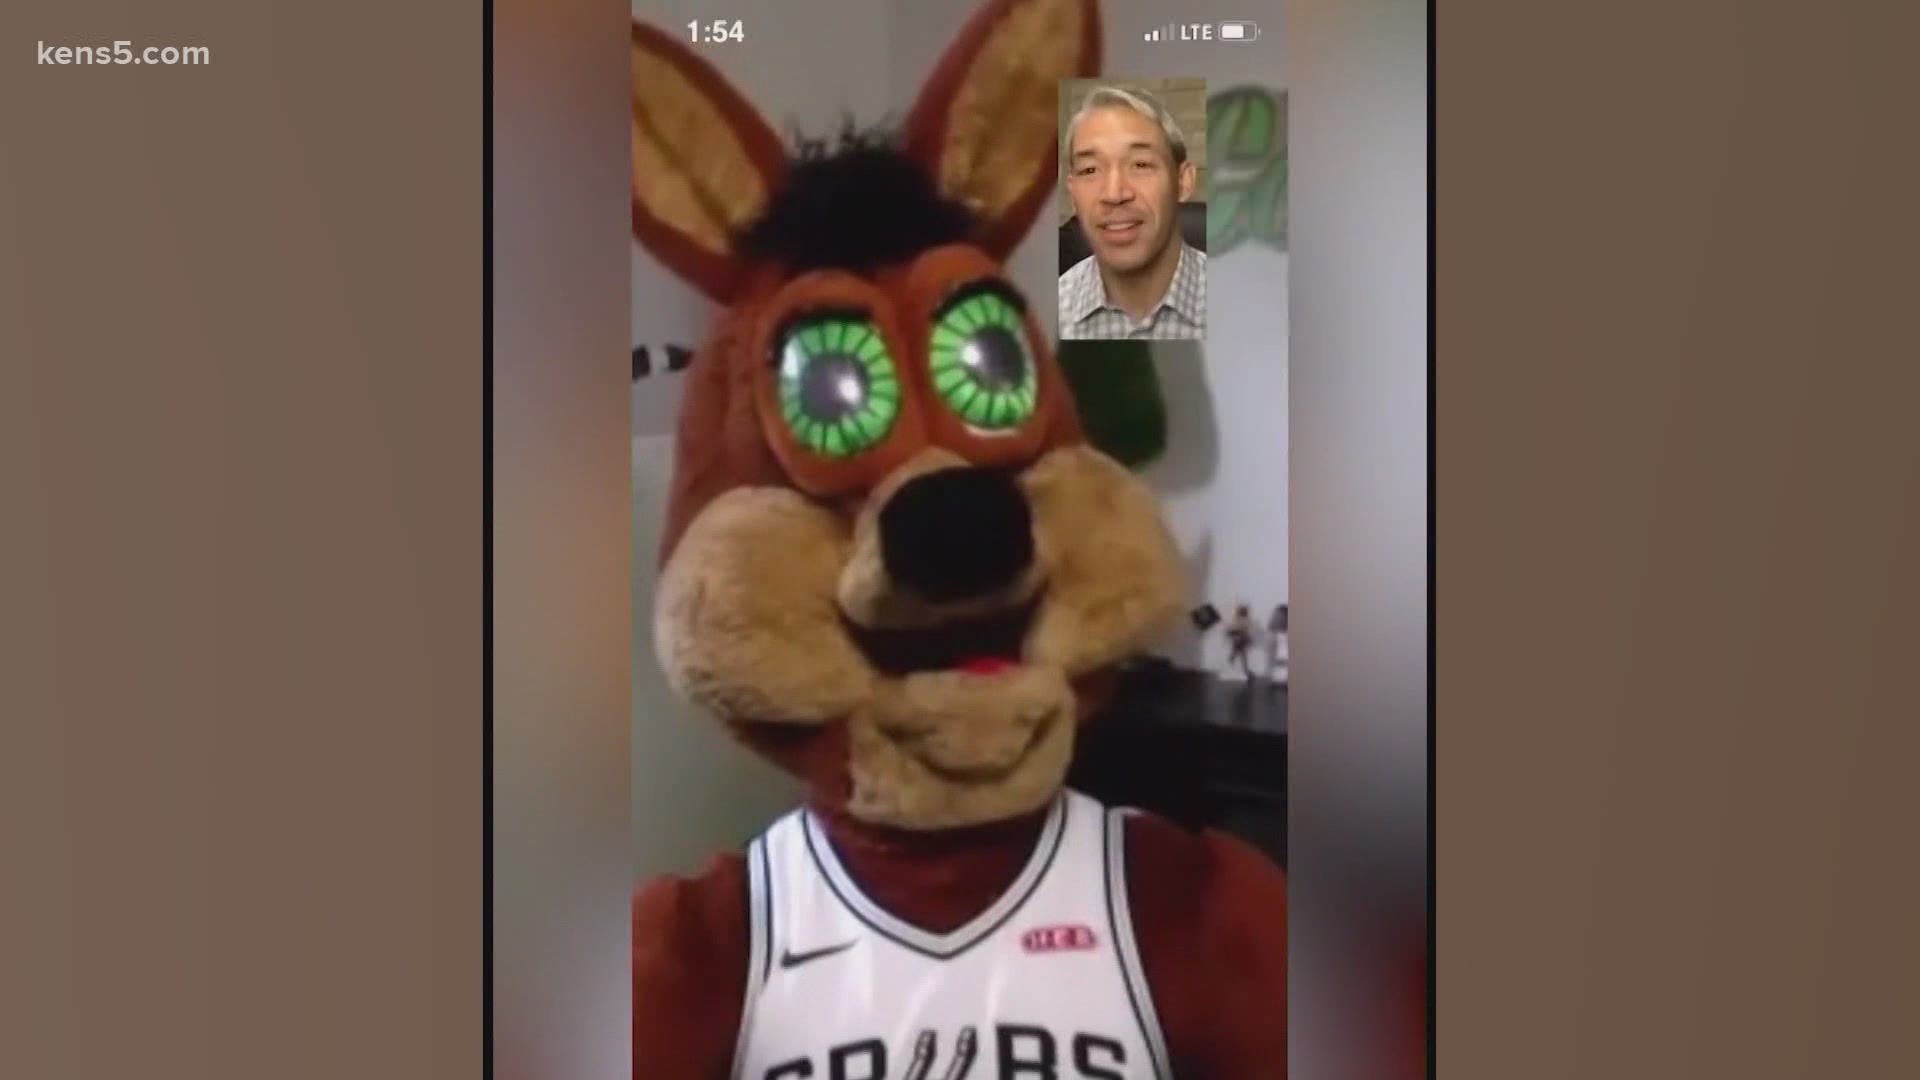 Mayor Nirenberg and the Spurs Coyote teamed up for a PSA. Kids can win prizes like Spurs memorabilia or Whataburger for a year.